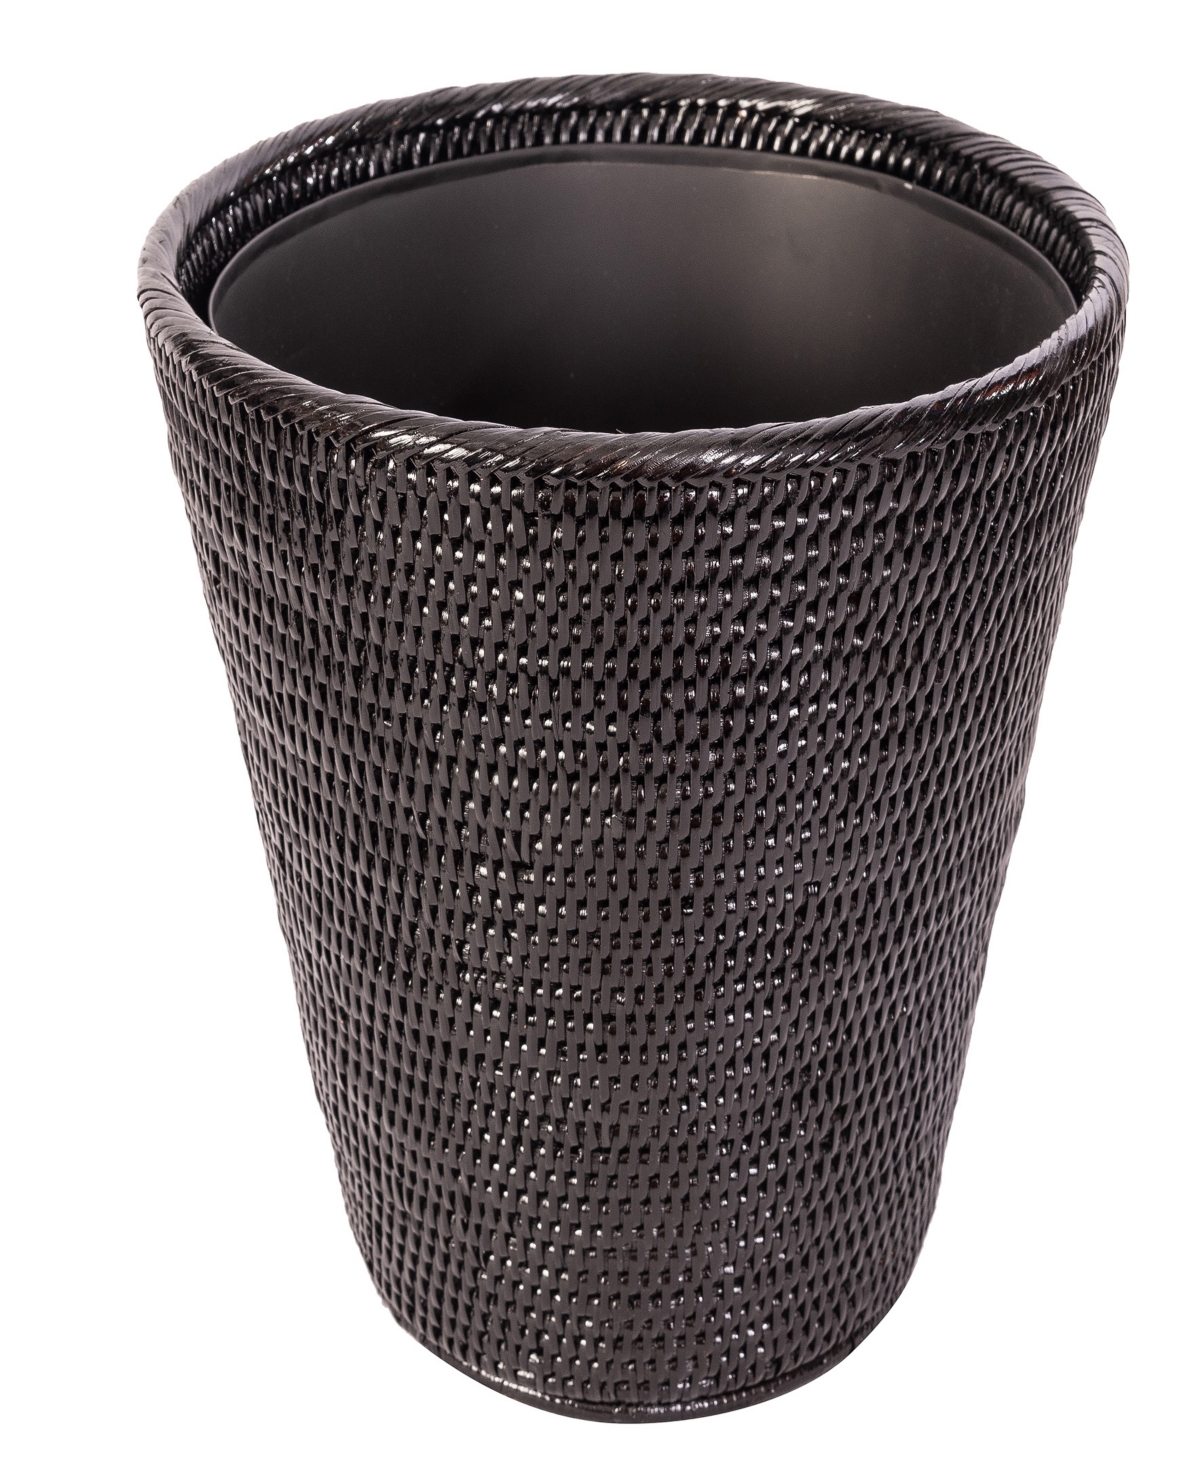 Artifacts Trading Company Rattan Round Tapered Waste Basket With Metal Liner In Tudor Black